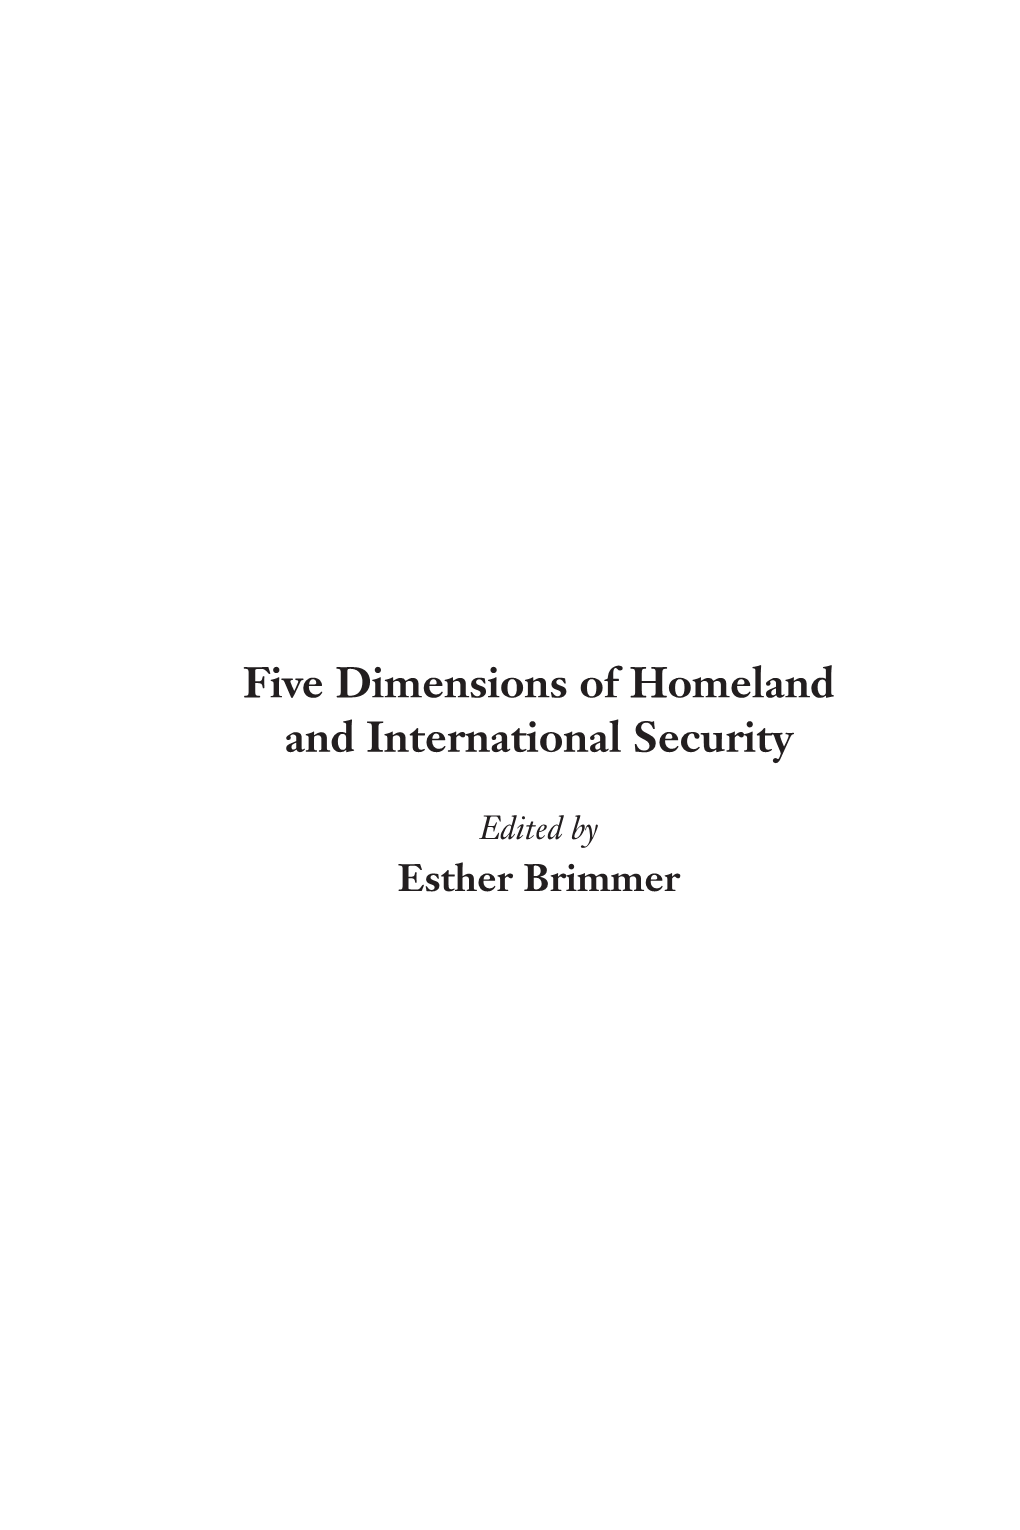 Five Dimensions of Homeland and International Security